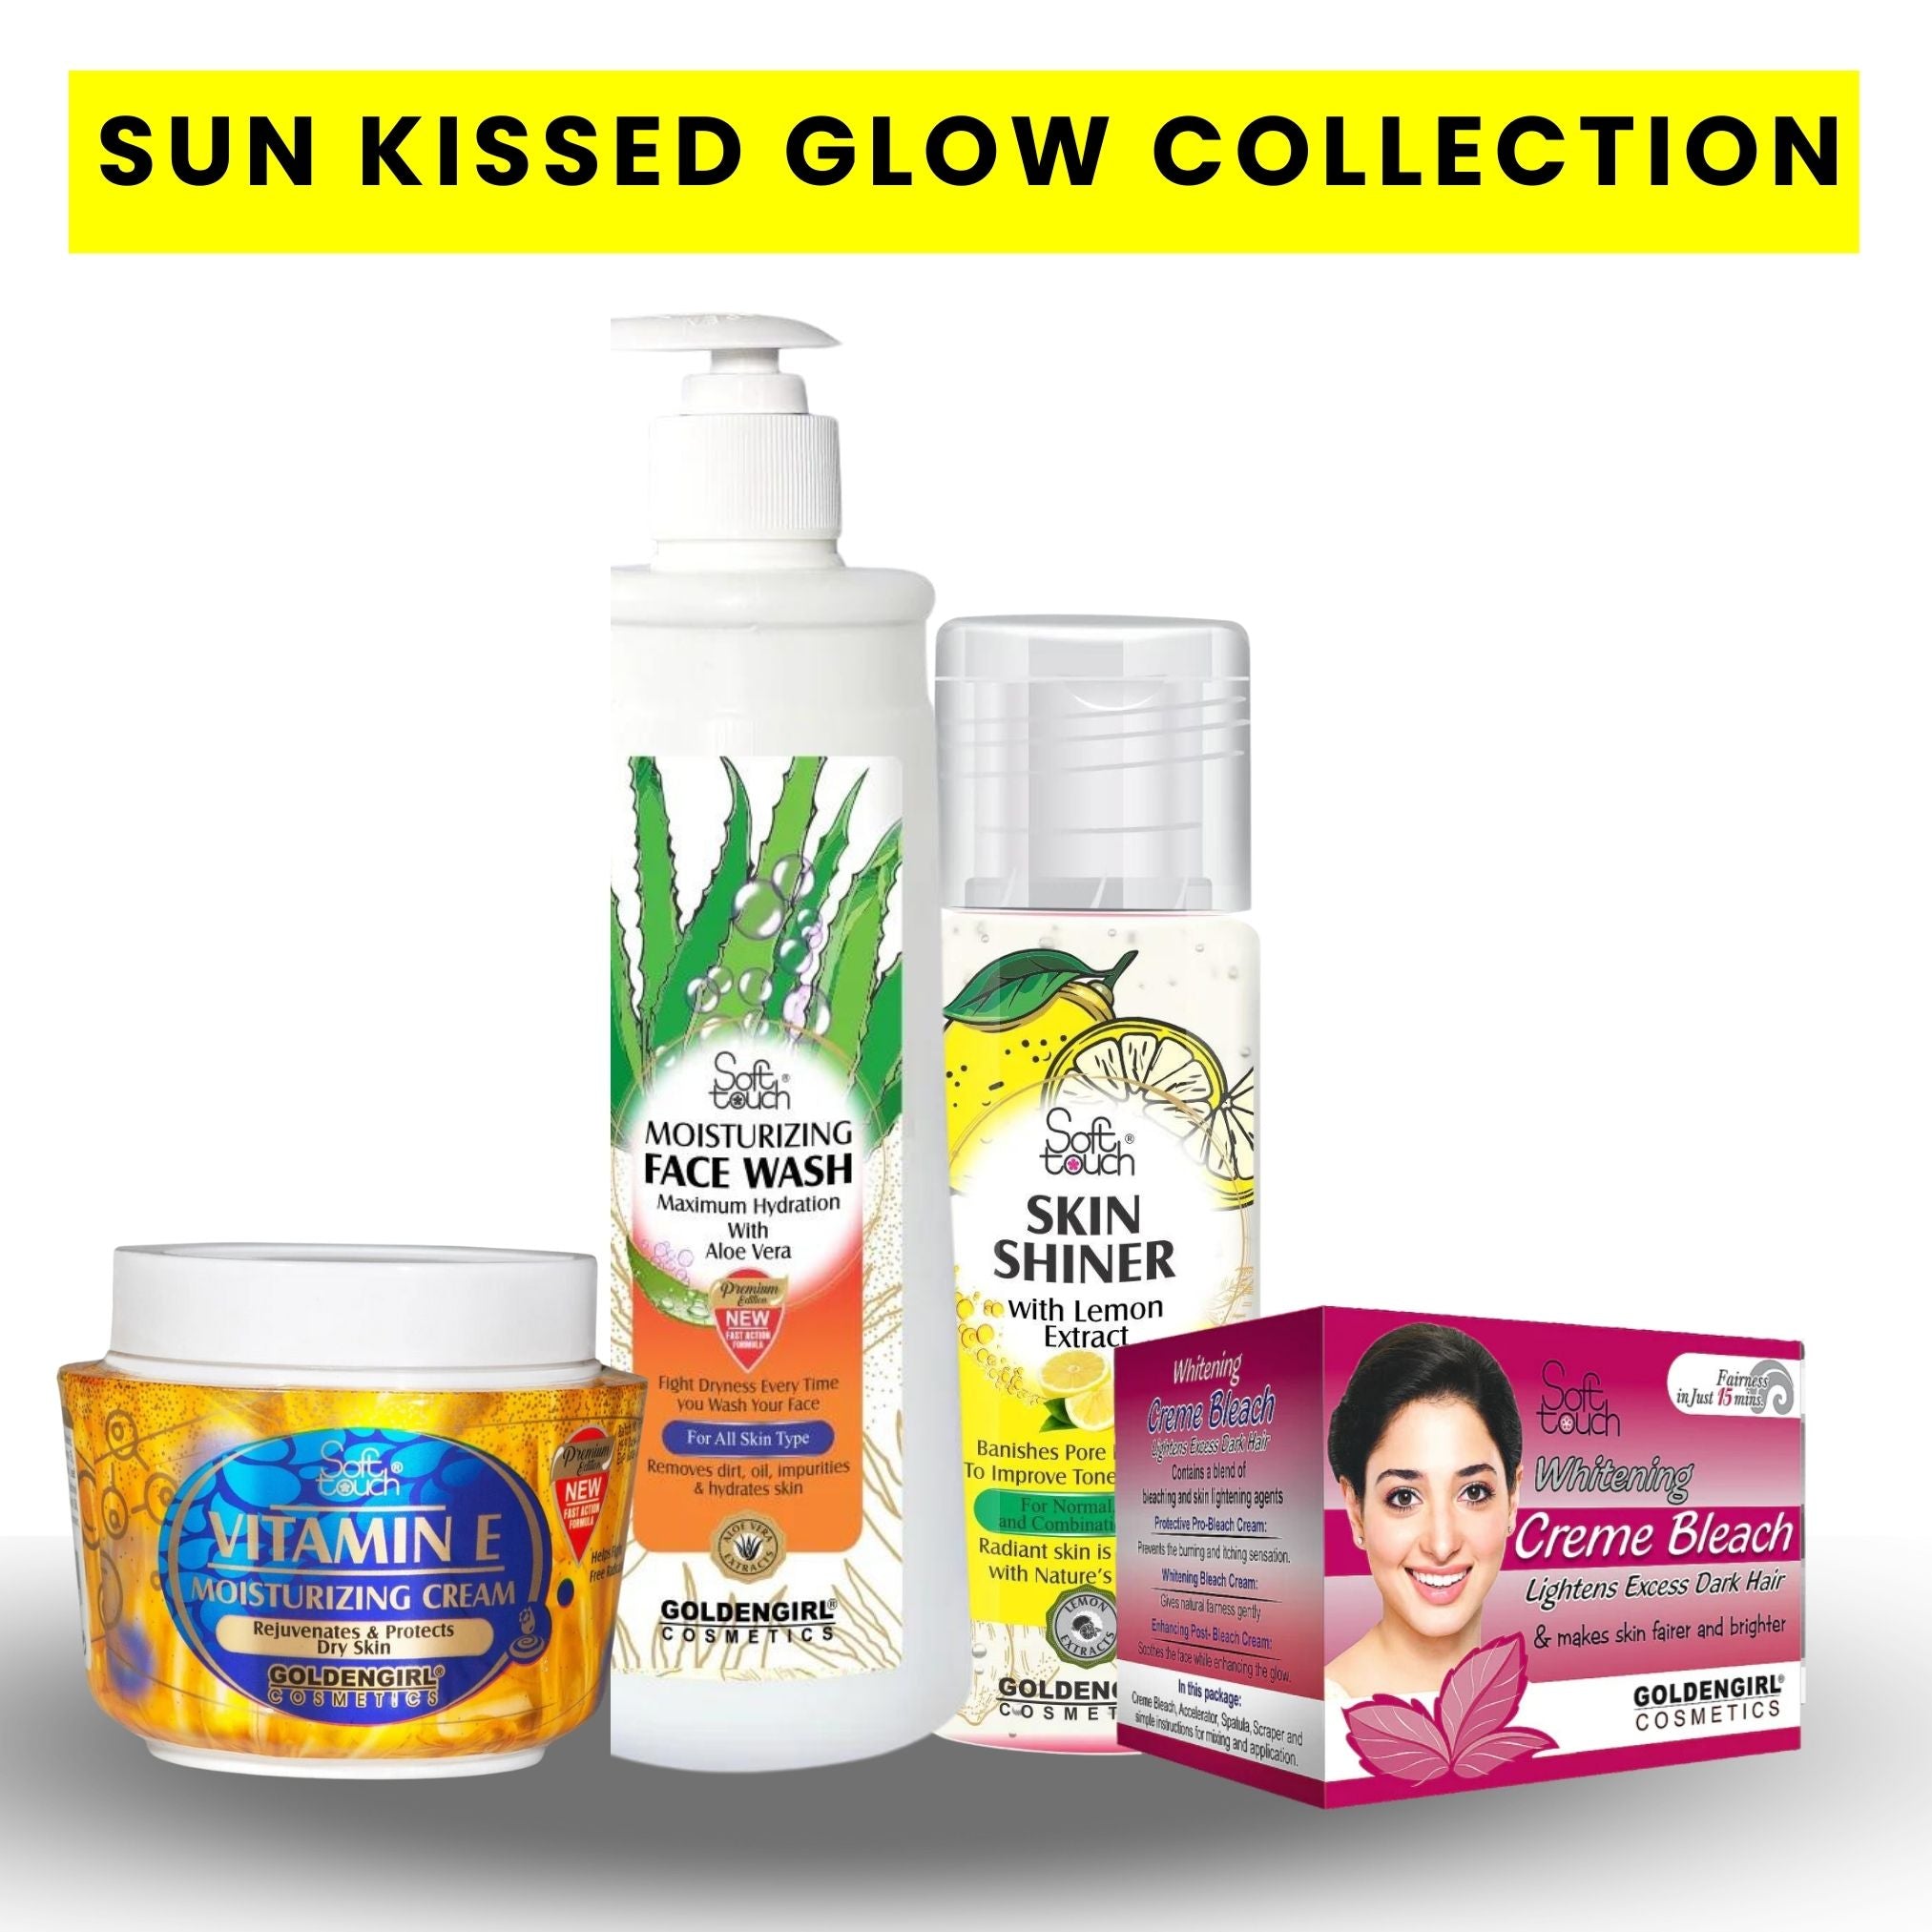 Sun-Kissed Glow Collection